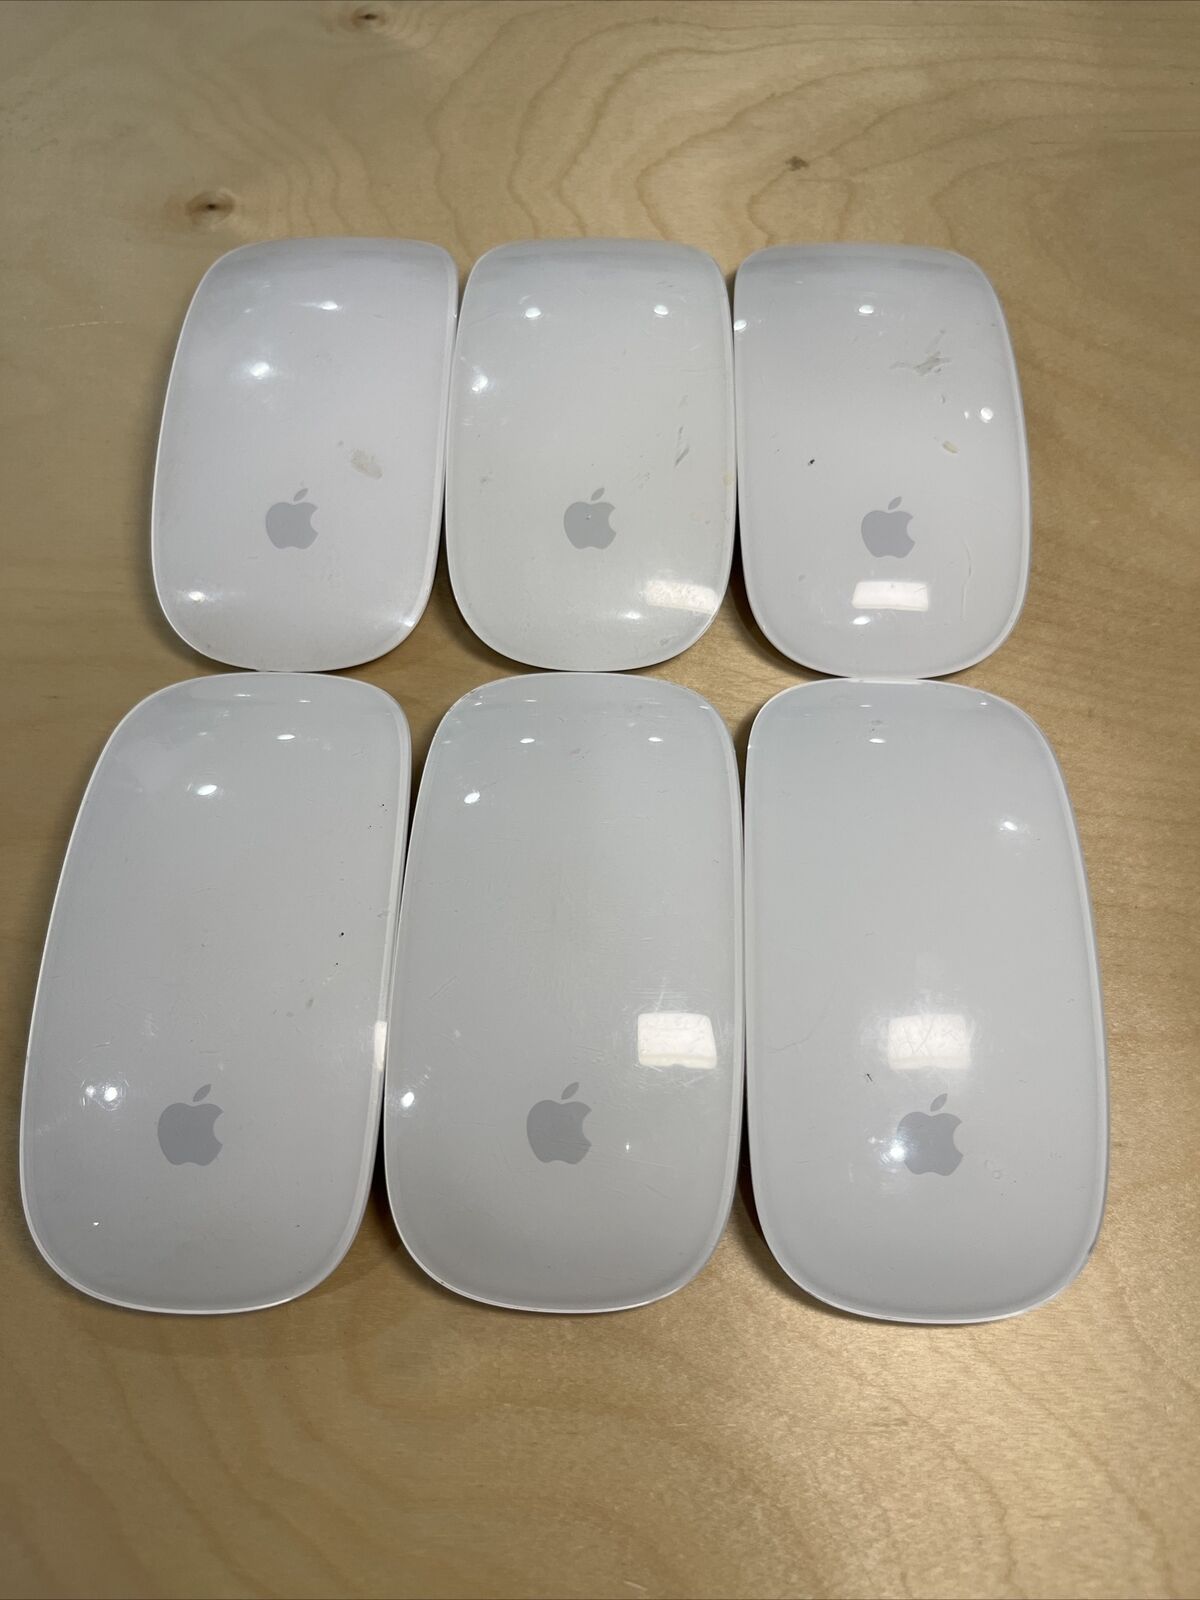 Lot of 6 Apple Magic Mouse A1296 Power Tested Only